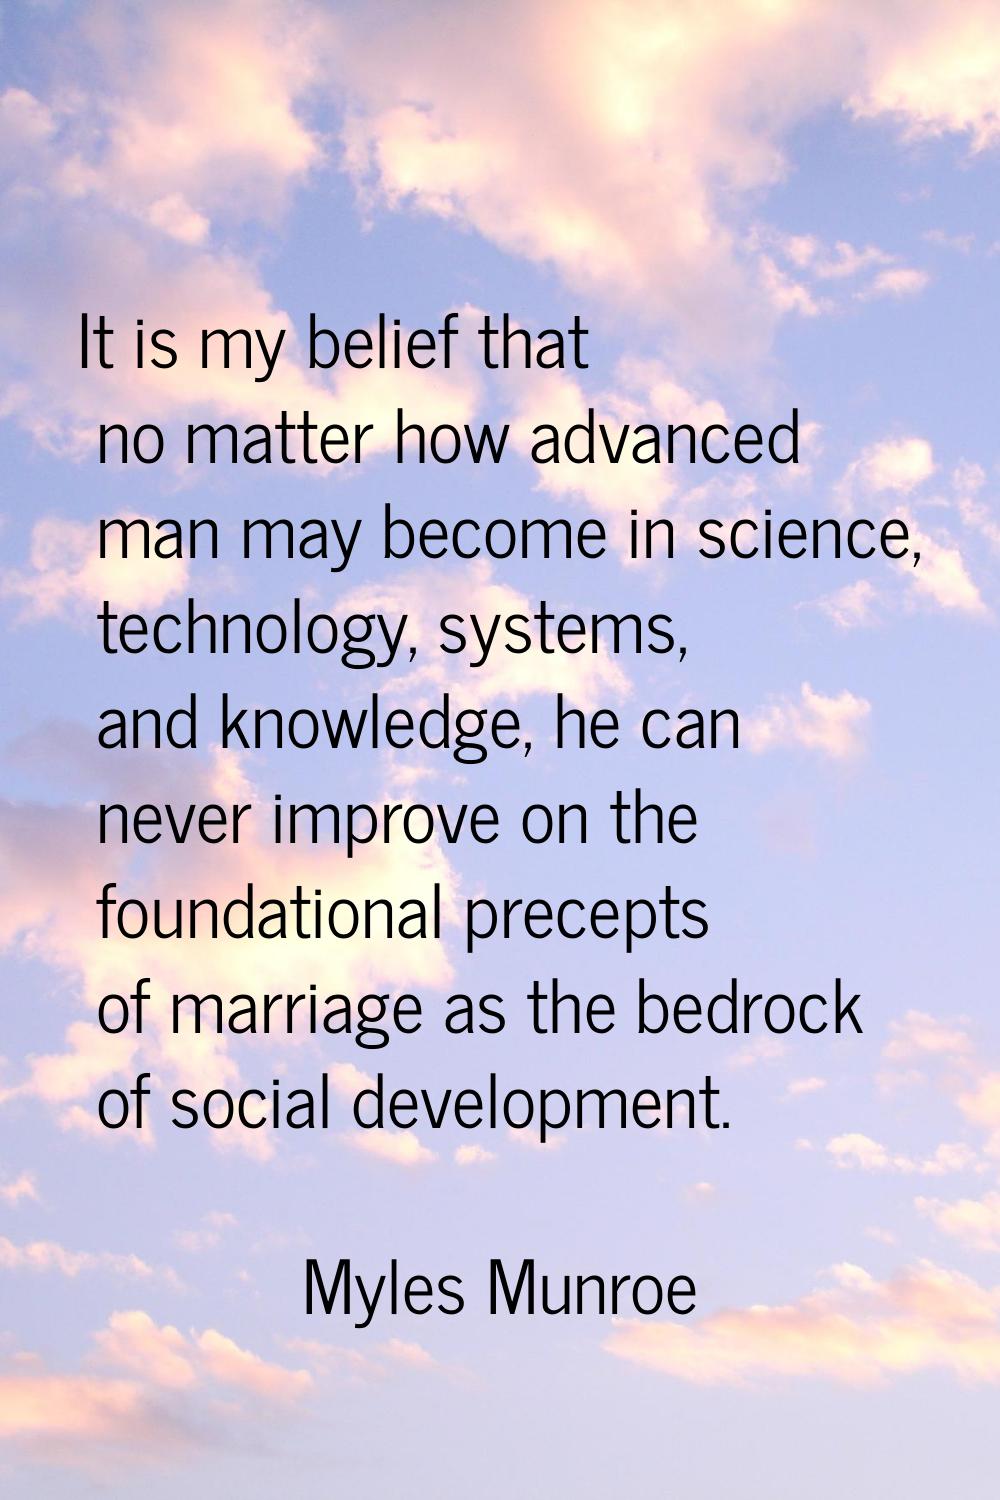 It is my belief that no matter how advanced man may become in science, technology, systems, and kno